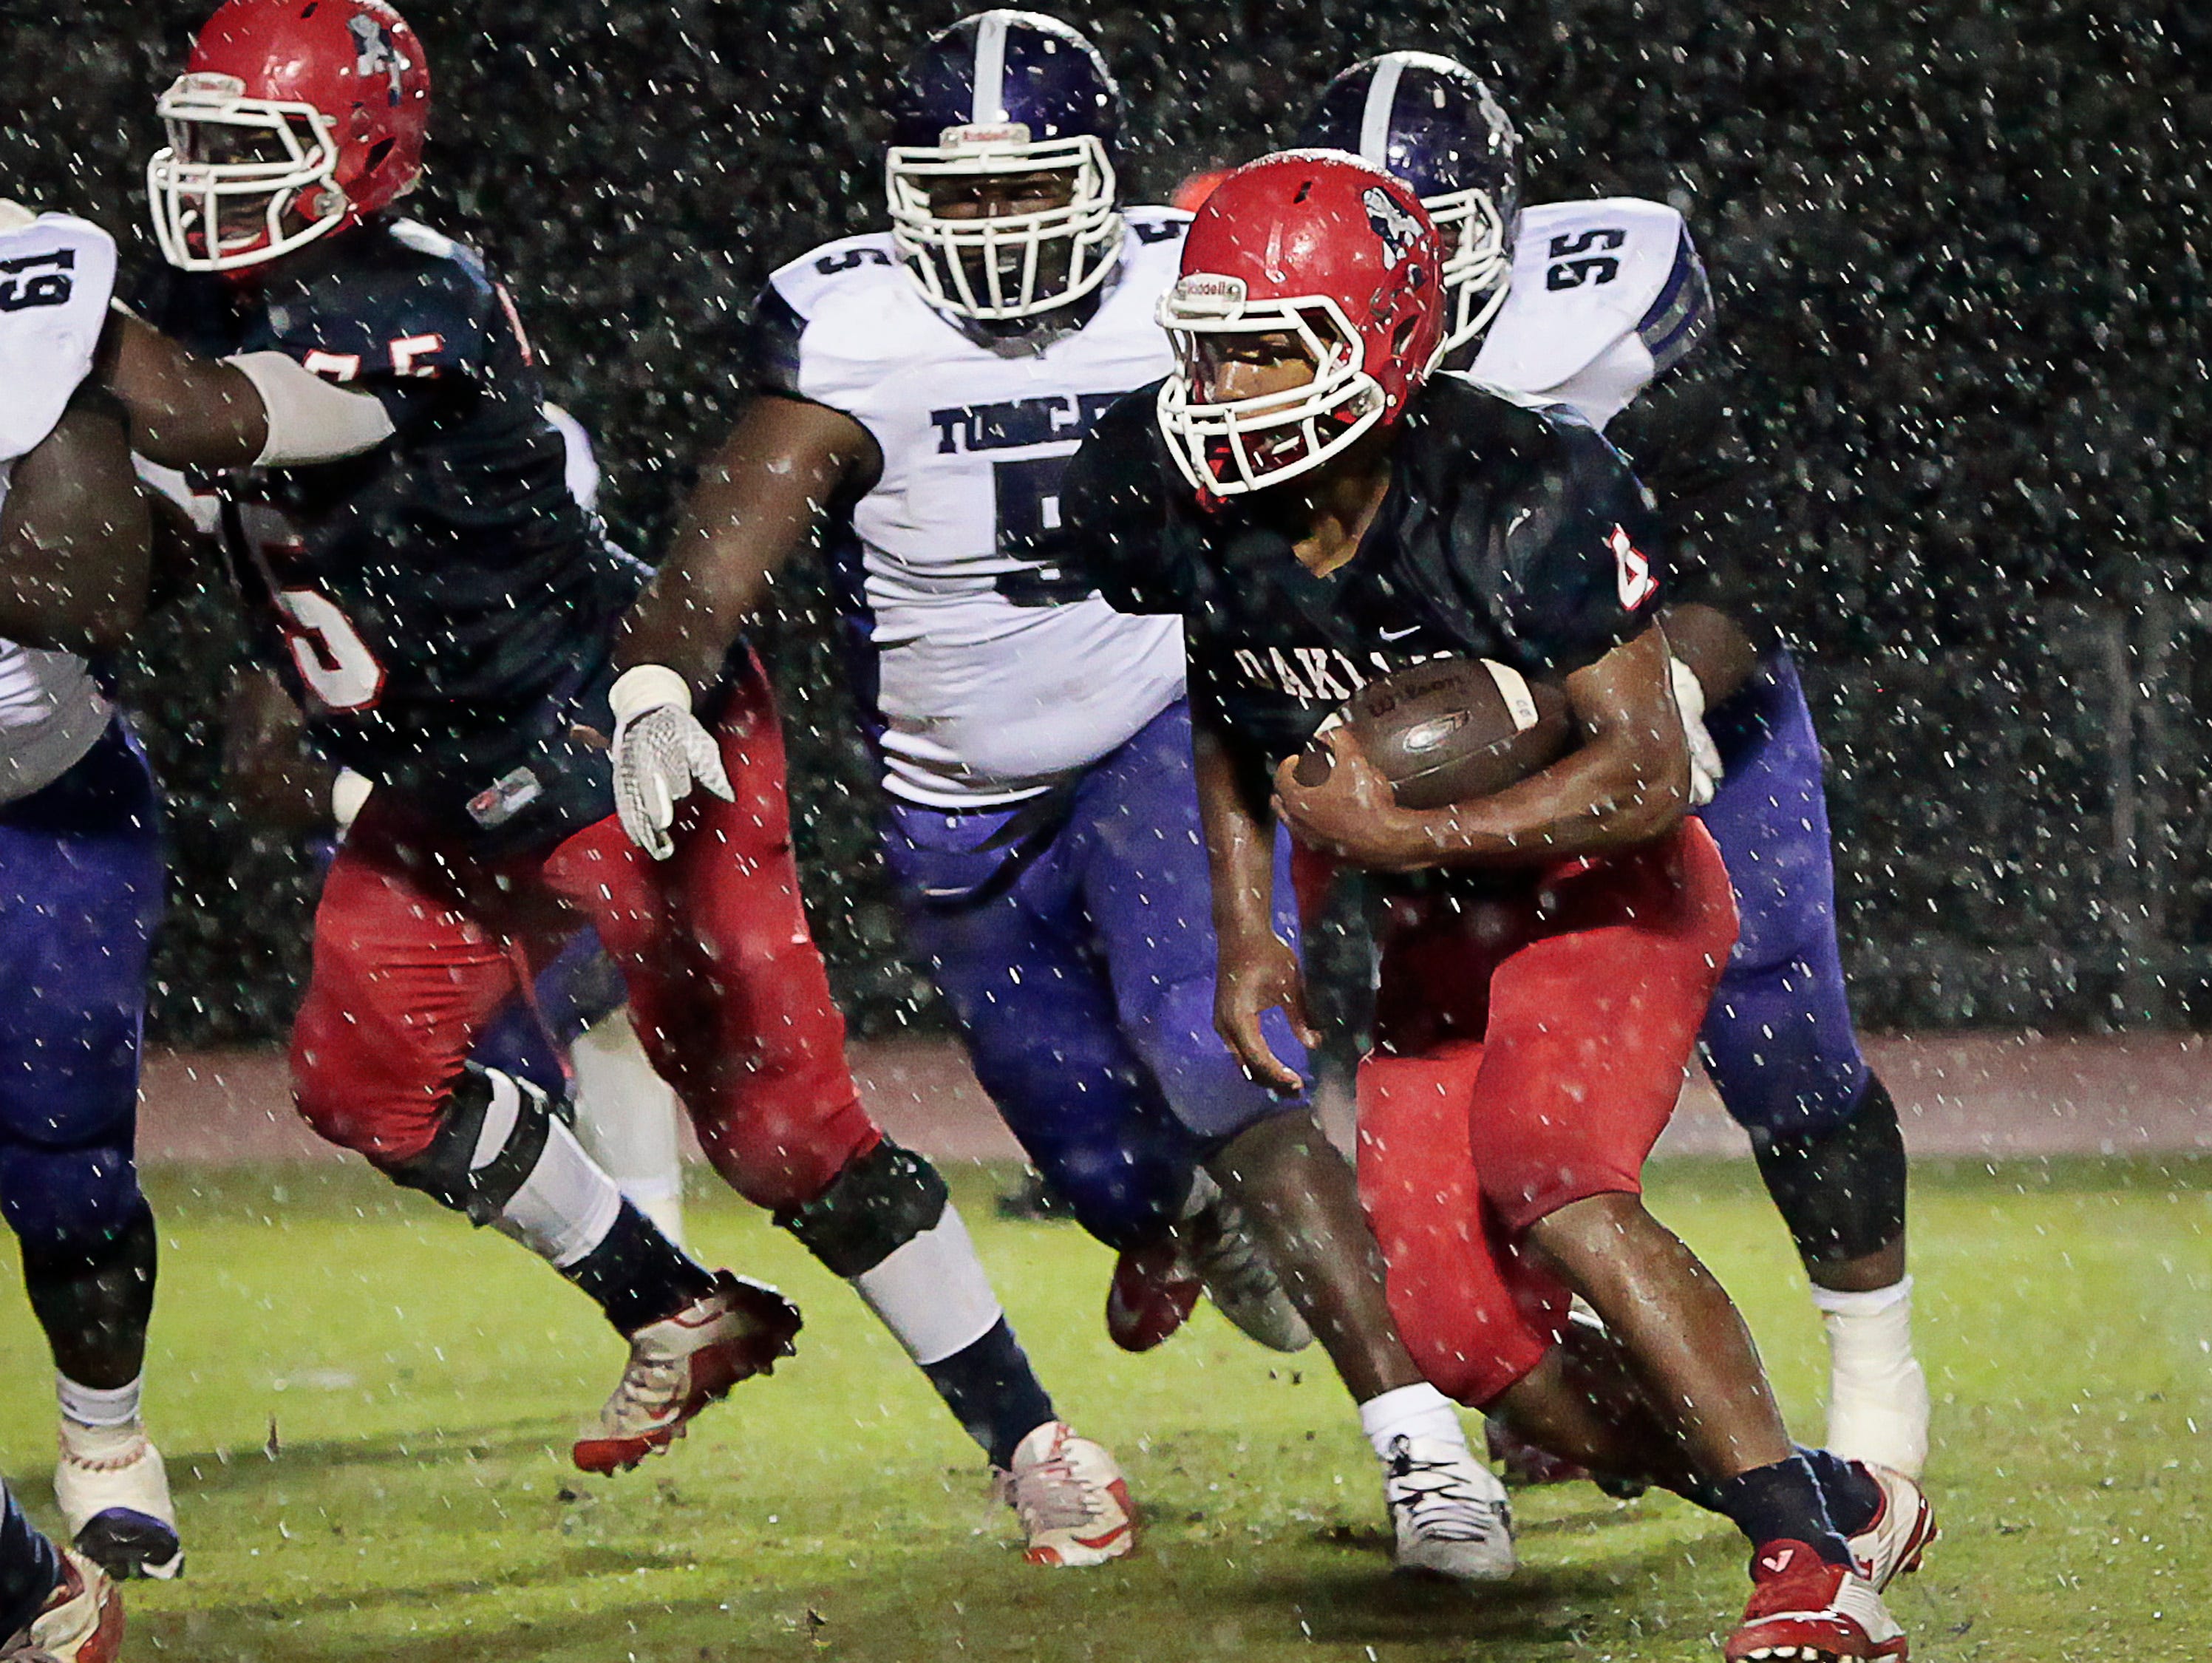 Oakland’s Lazarius Patterson (4) scored four touchdowns in the Patriots’ 49-6 win Friday night.